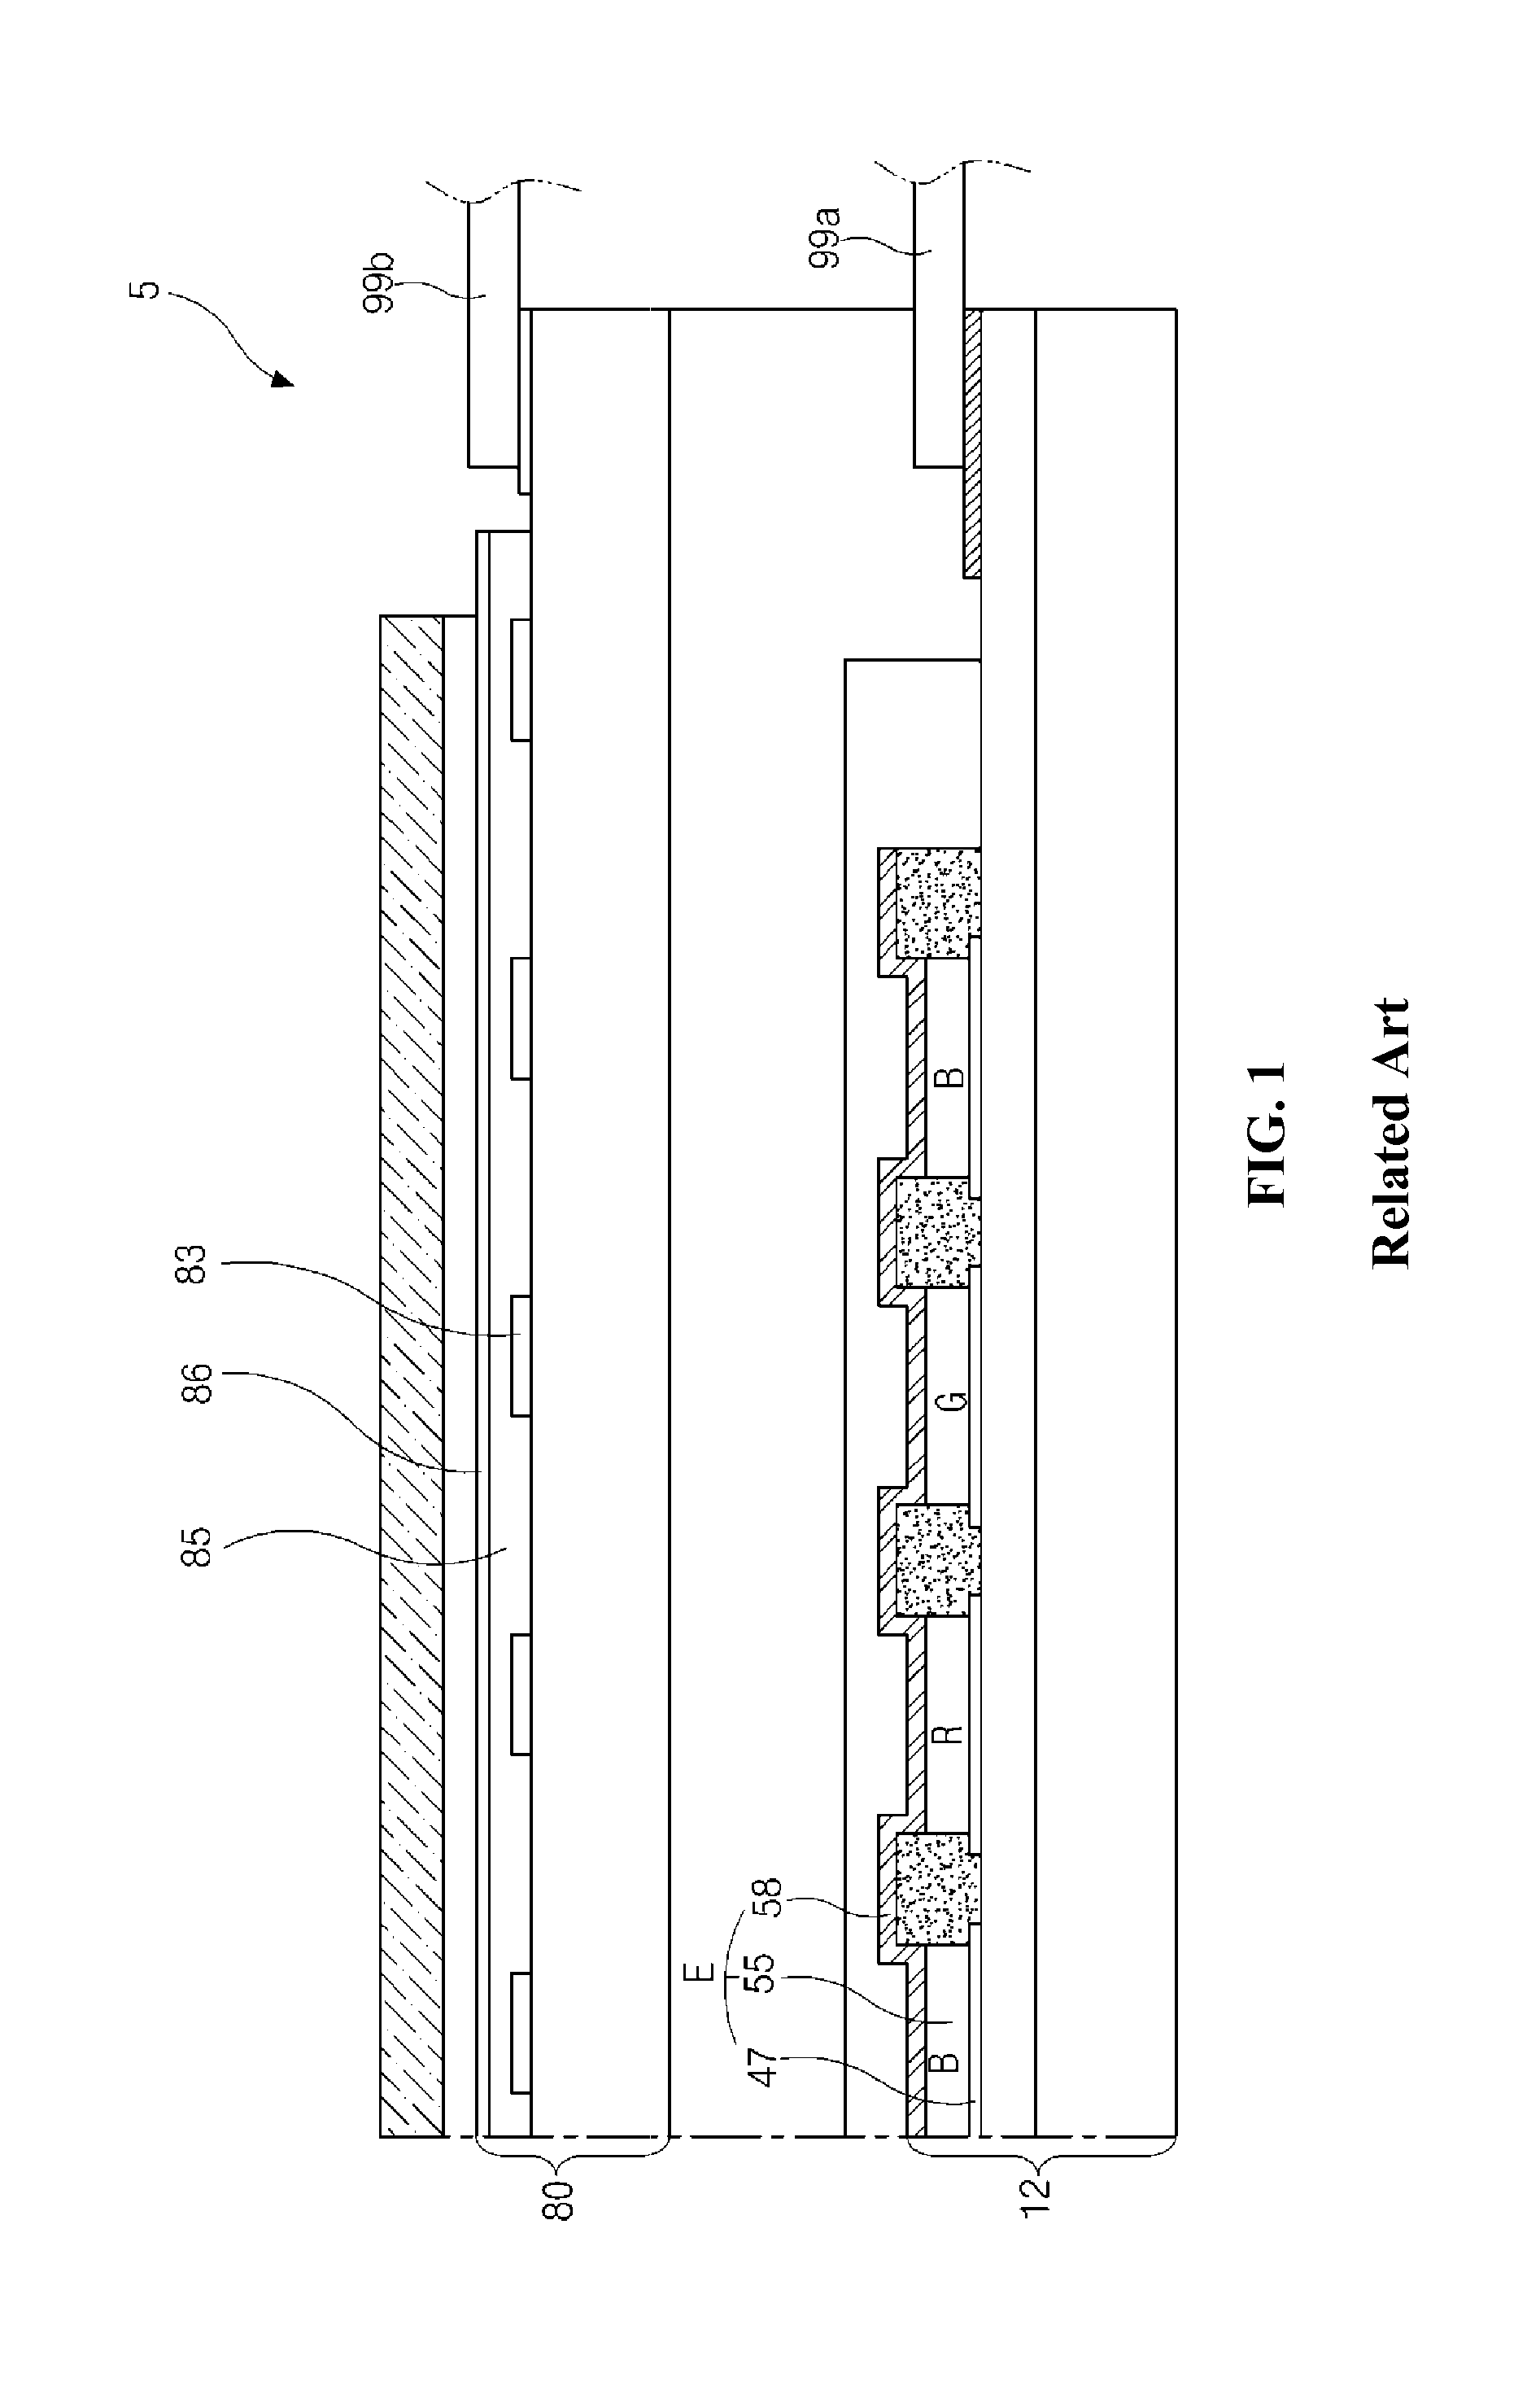 Organic light emitting diode display device with touch screen and method of fabricating the same